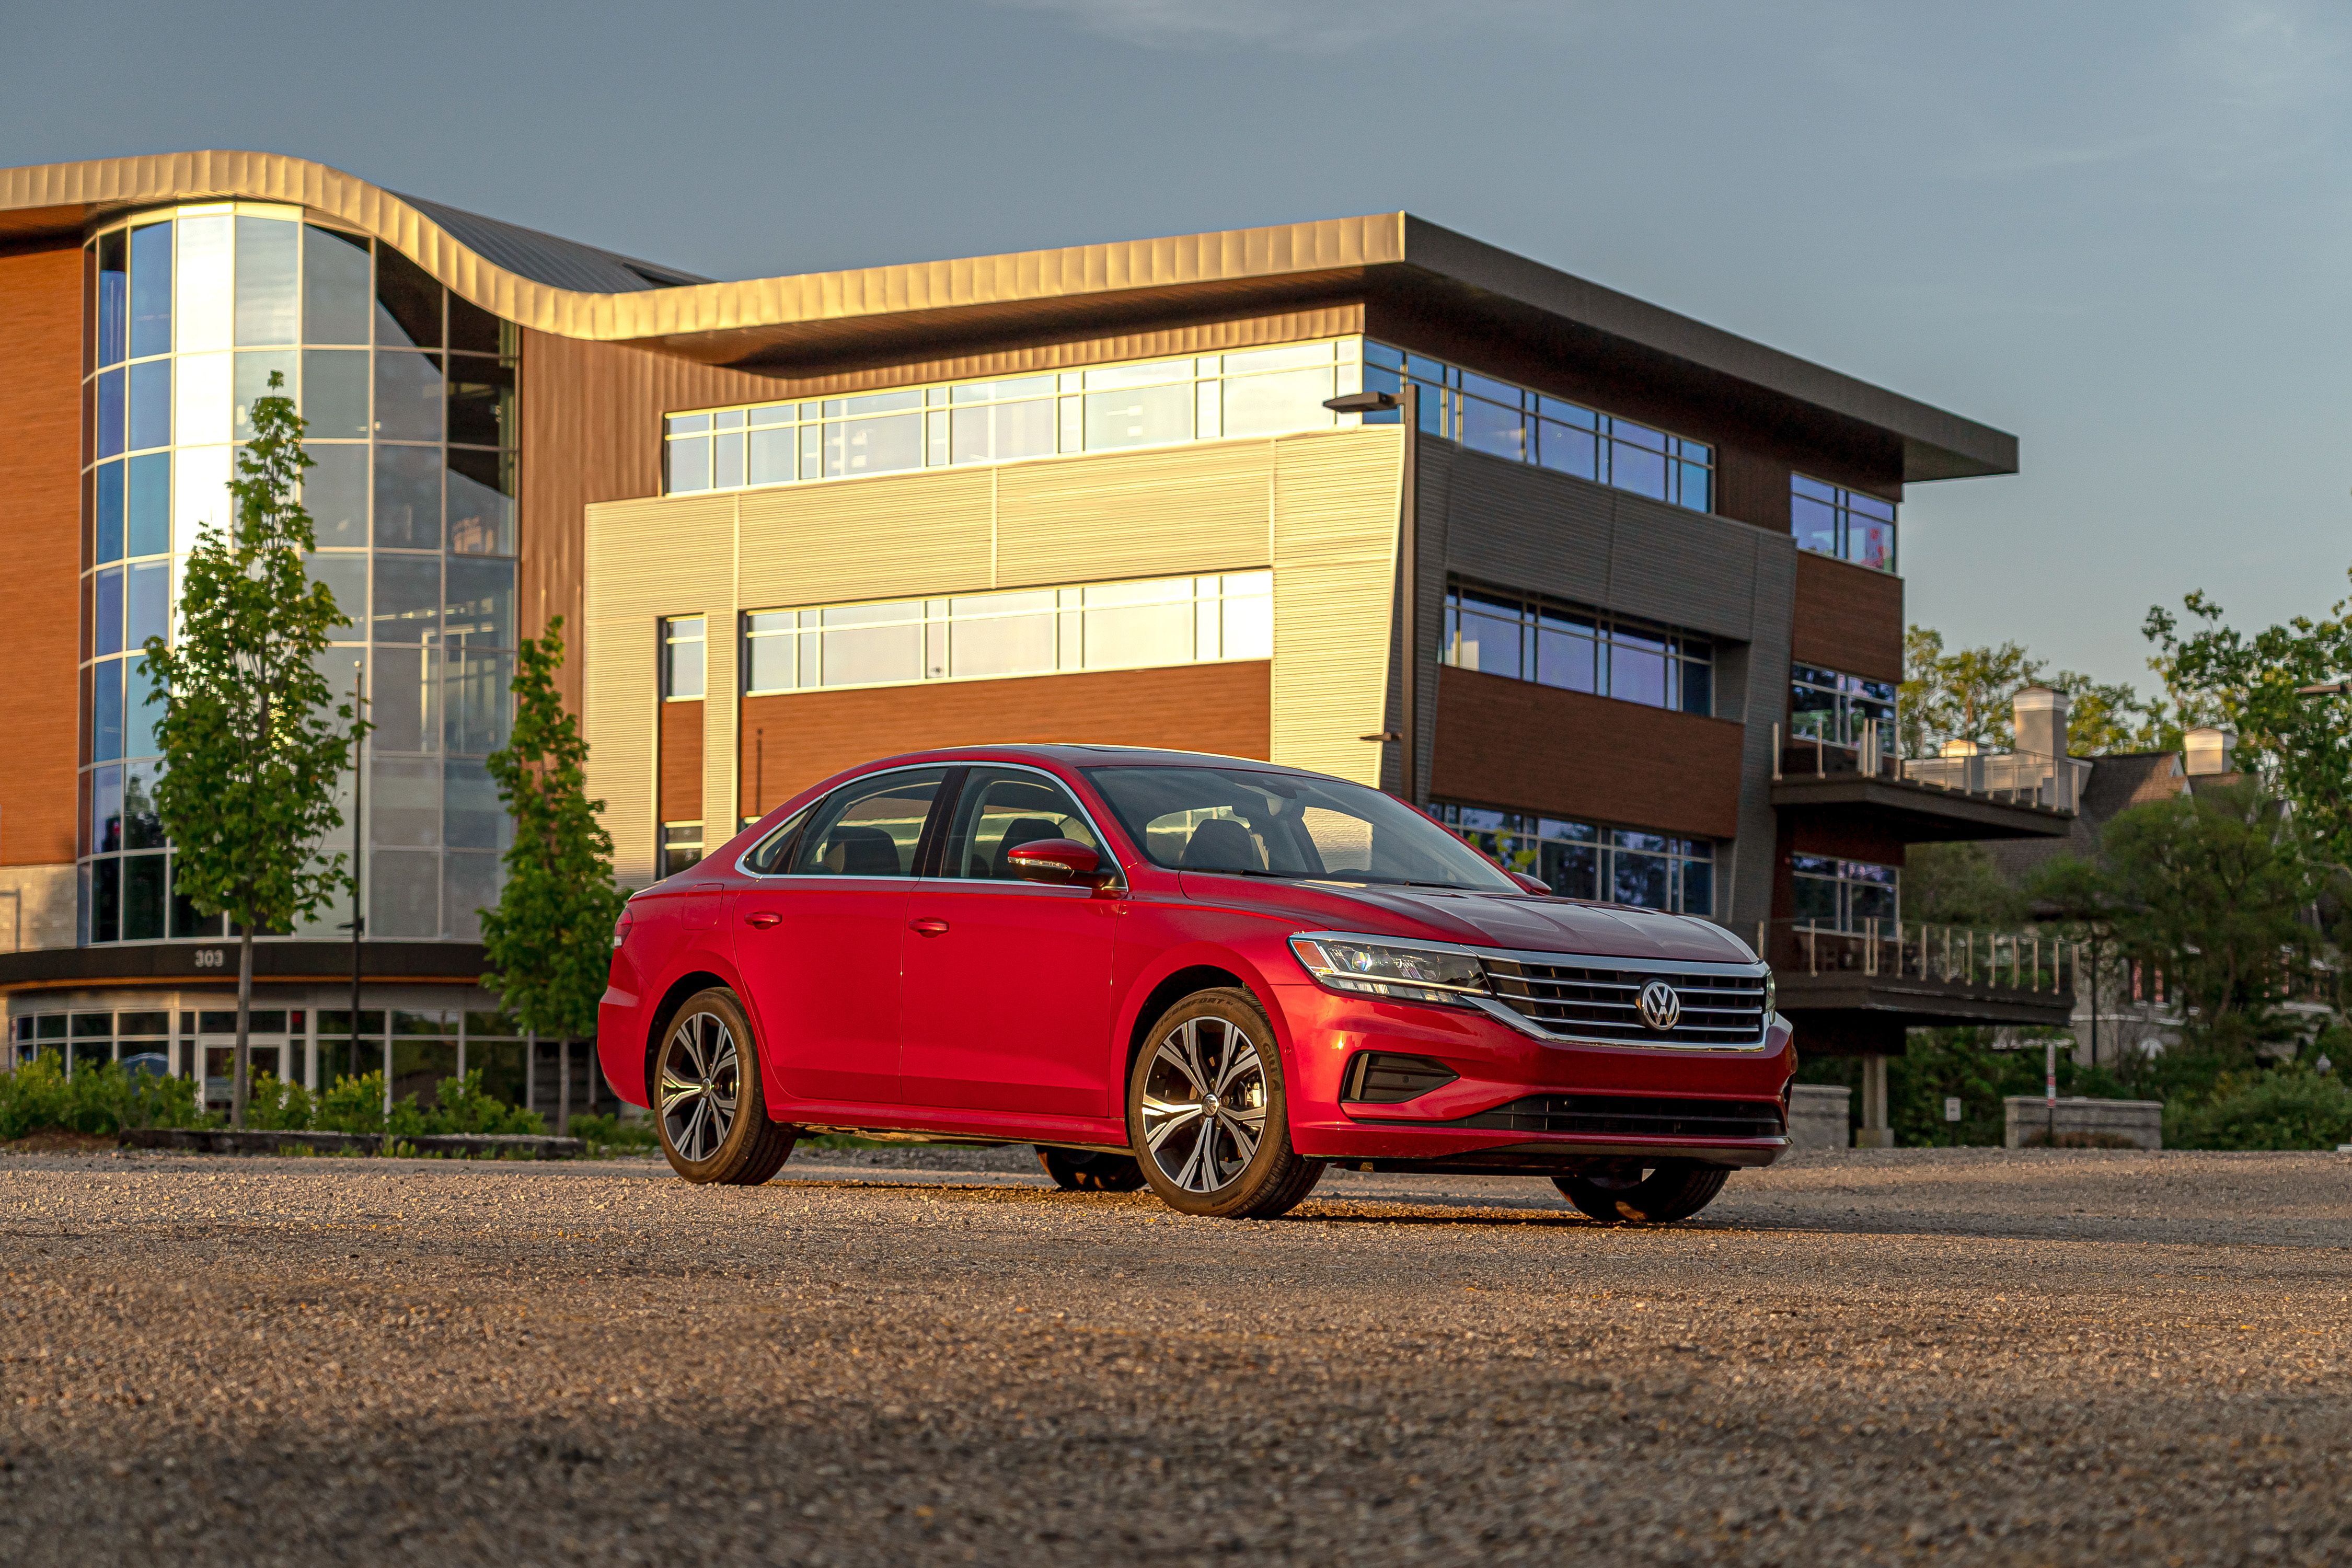 Review: The Improved 2020 Volkswagen Passat Is a Missed Opportunity